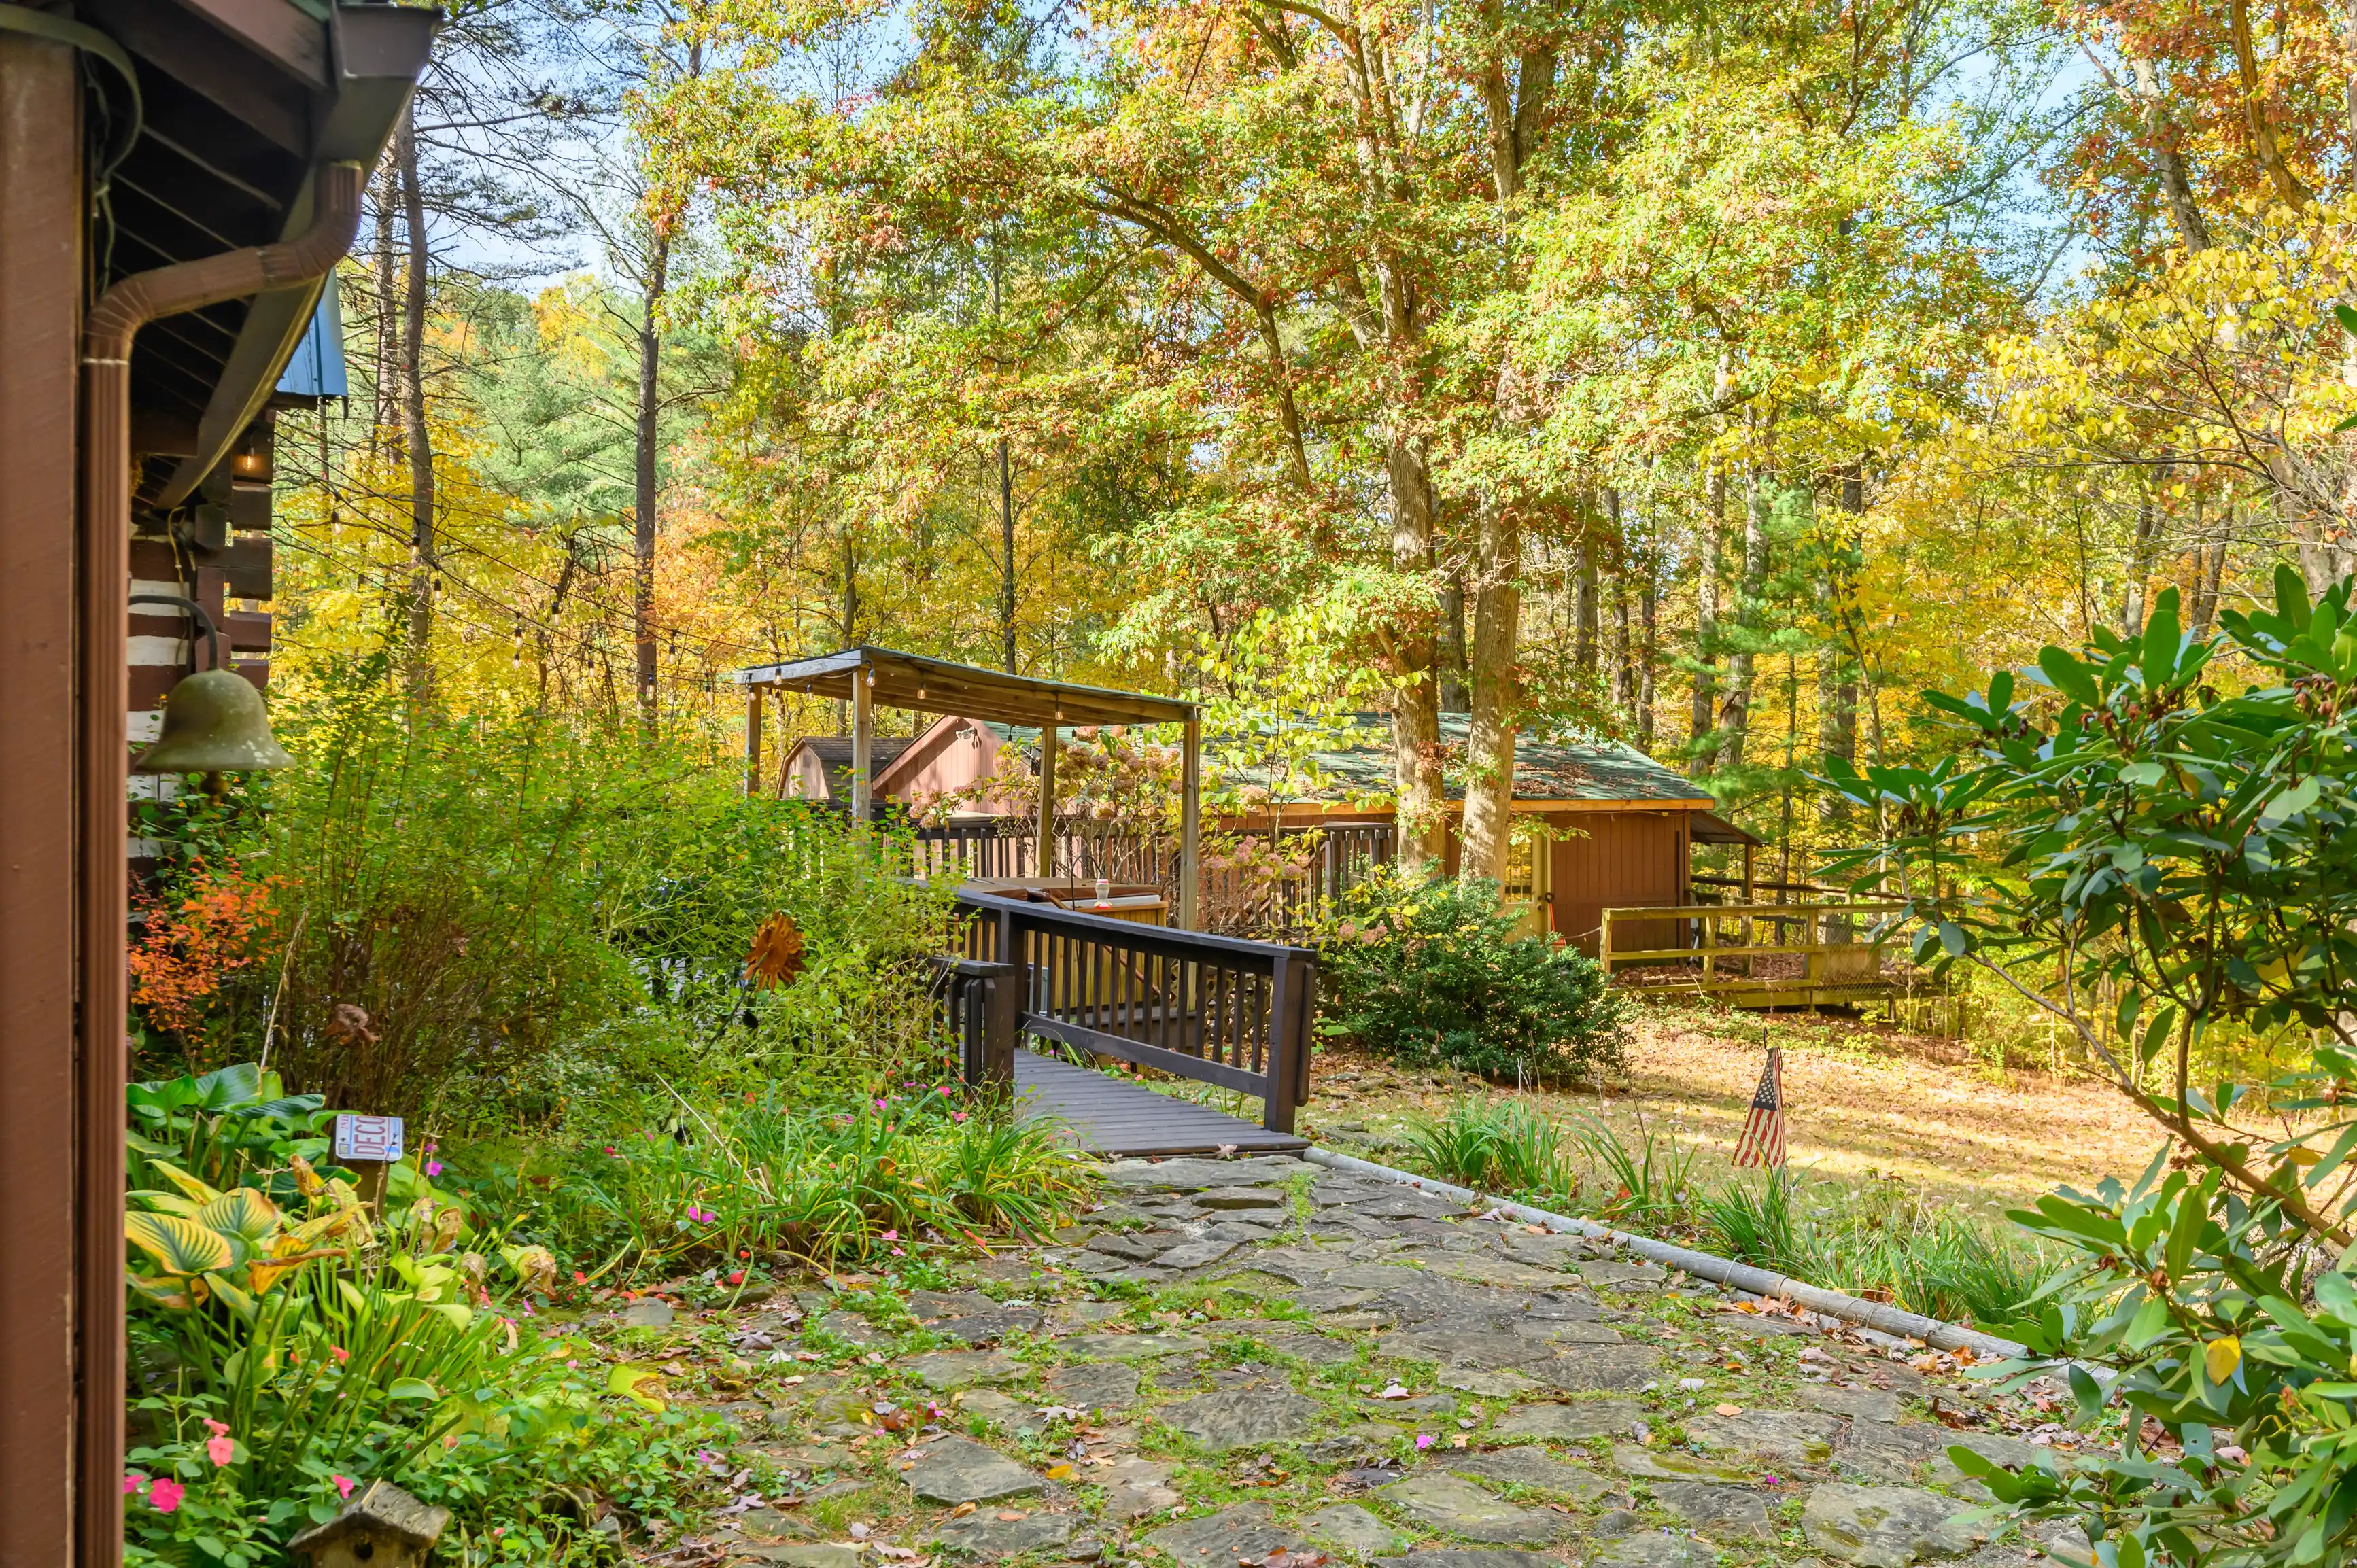 Stone pathway leading to a wooden bridge in a serene autumn forest setting with a cabin in the background and colorful foliage around.